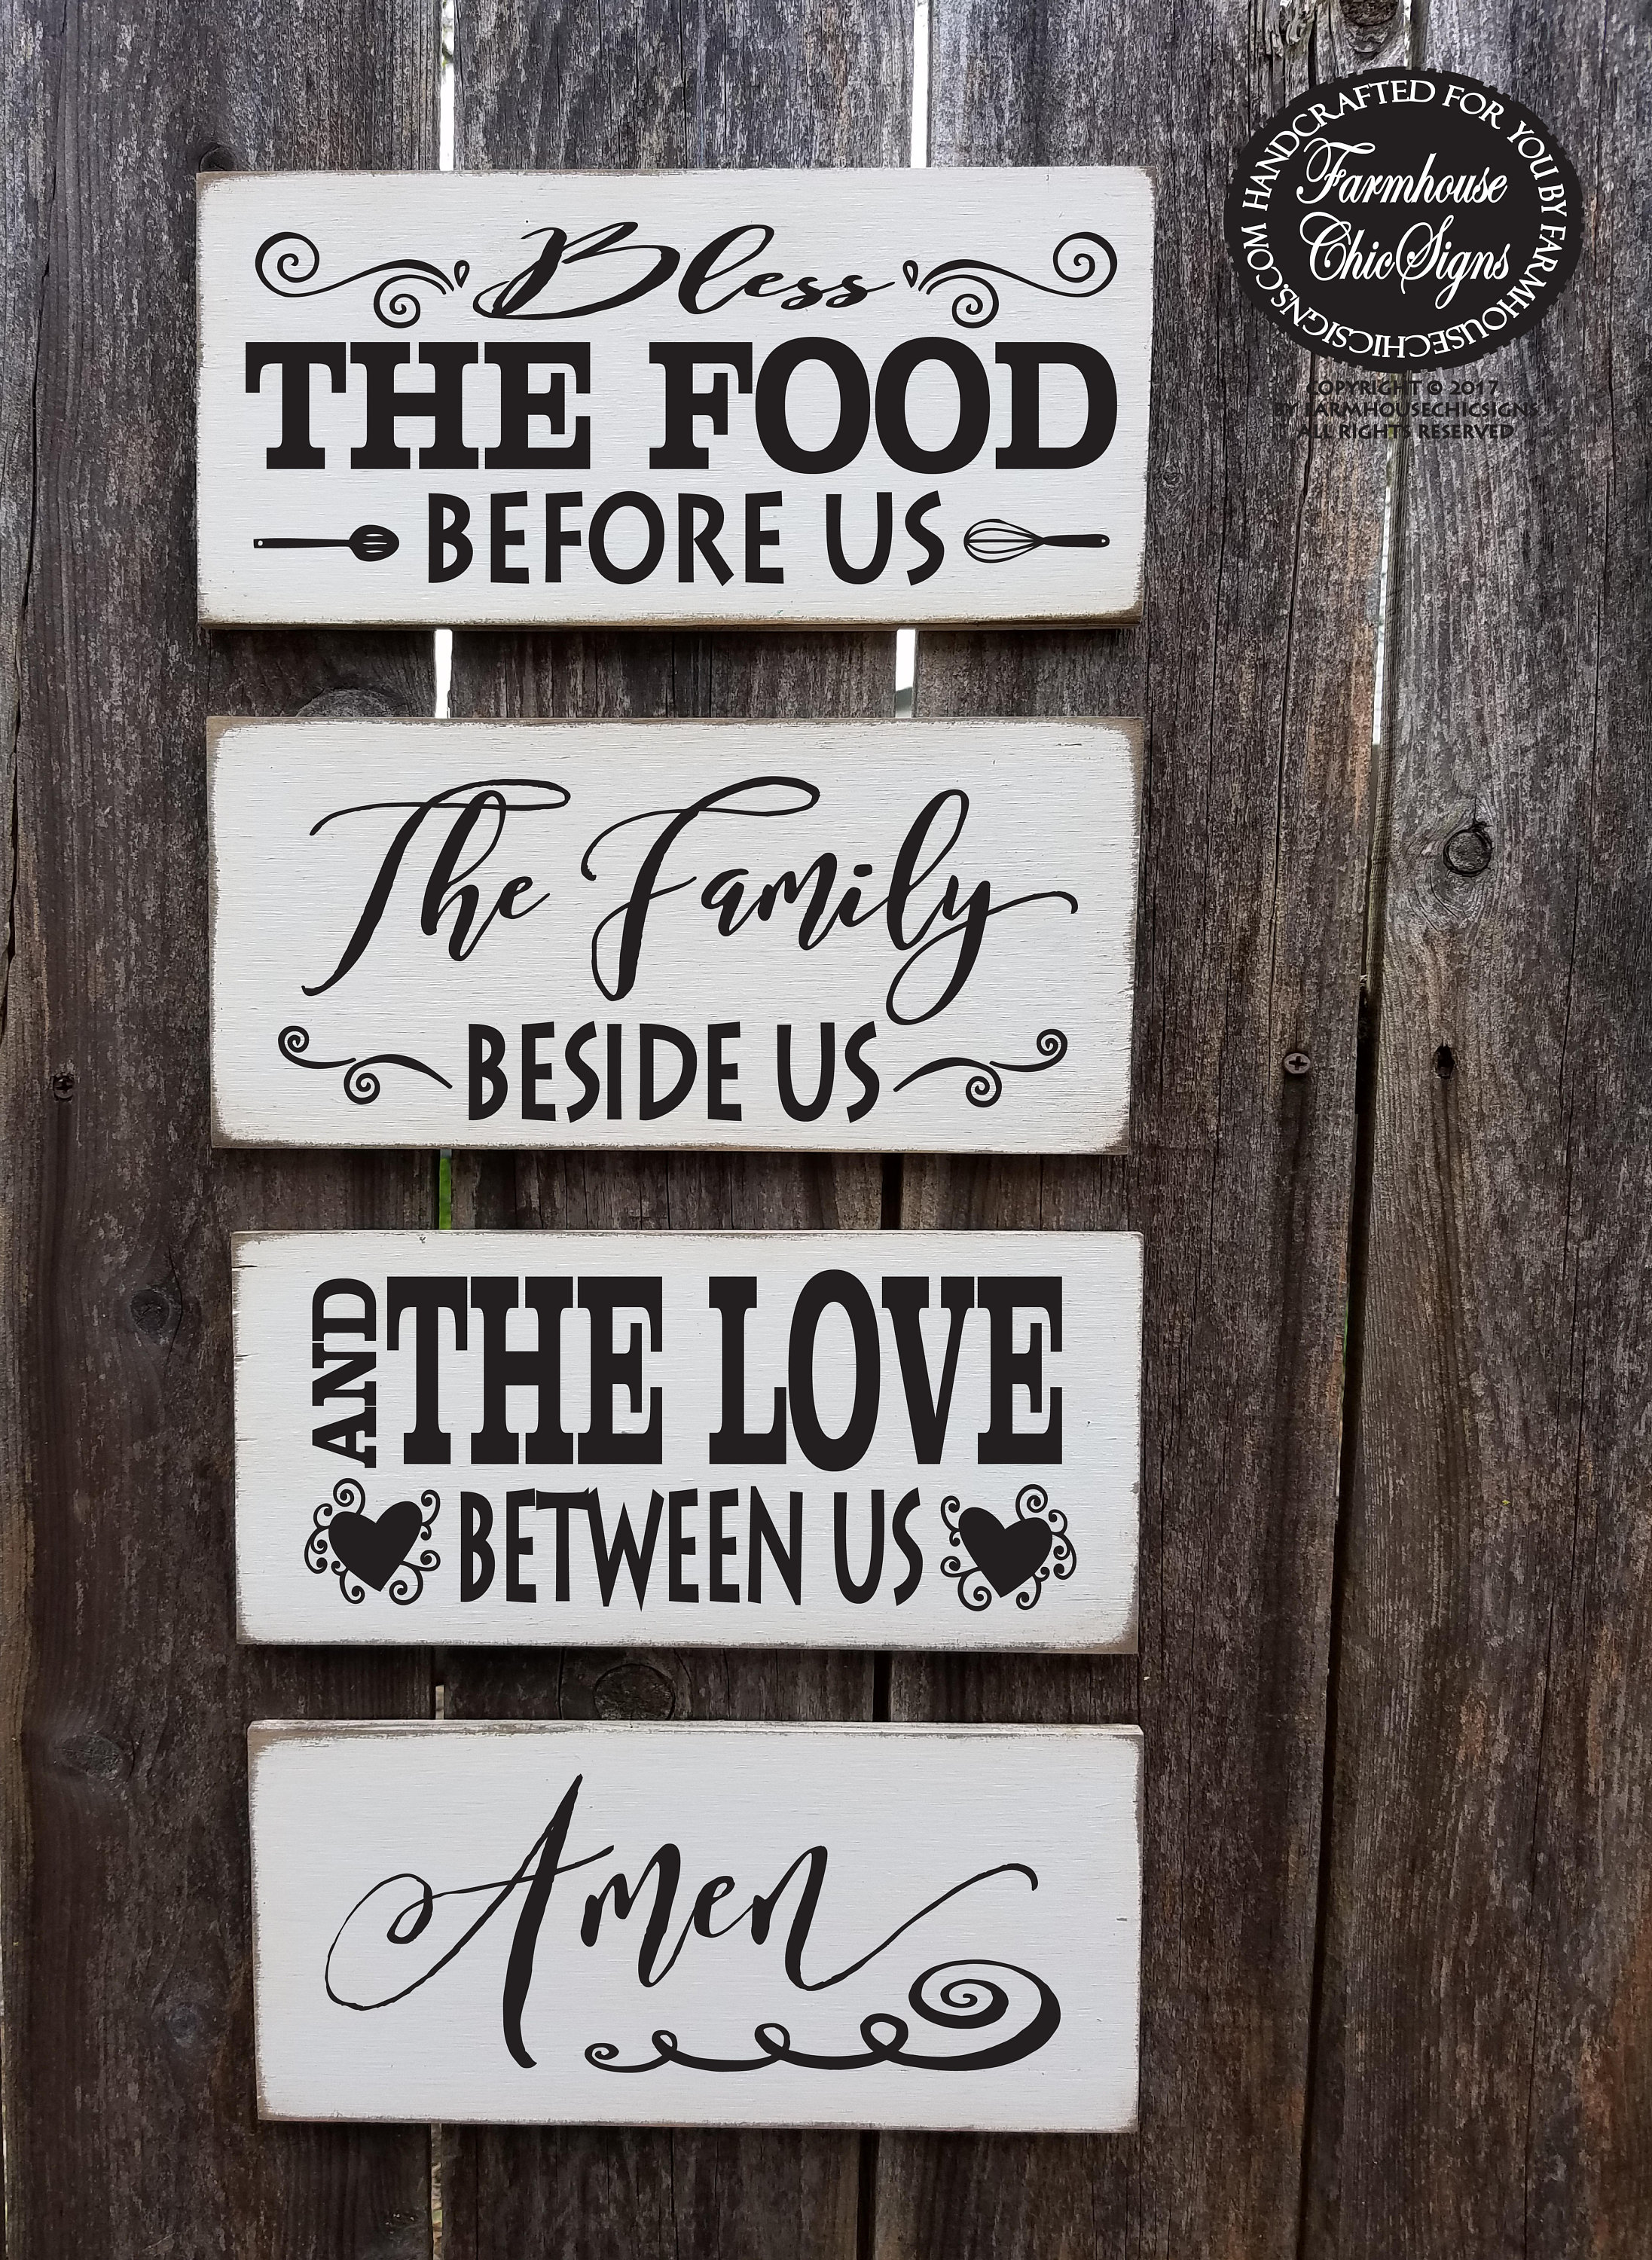 TIN SIGN Bless The Food Before Us Rustic Sign Kitchen Cottage Farm A016 